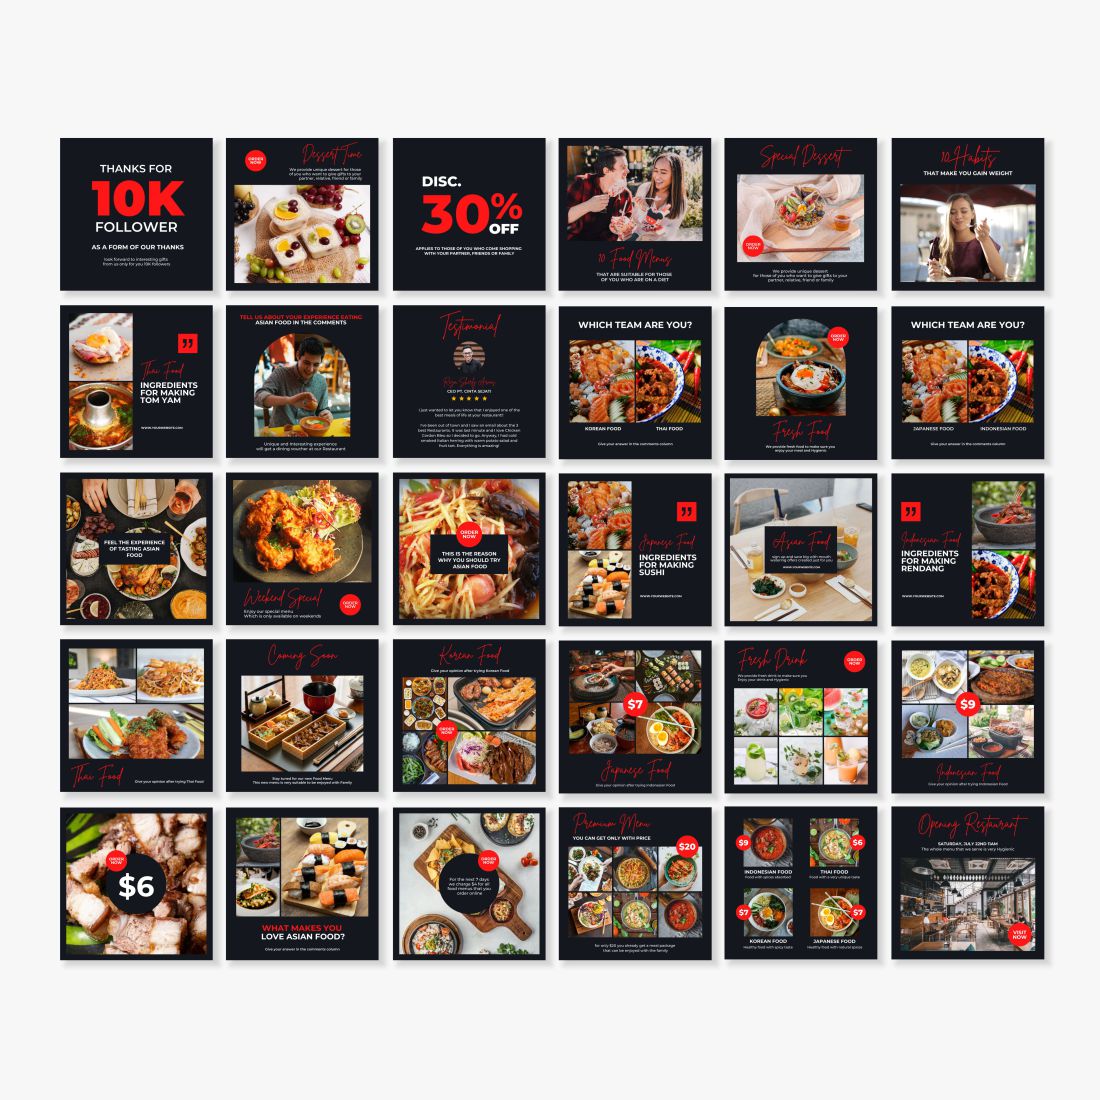 Food And Restaurant Instagram Post Canva Instagram Templates Post Example.